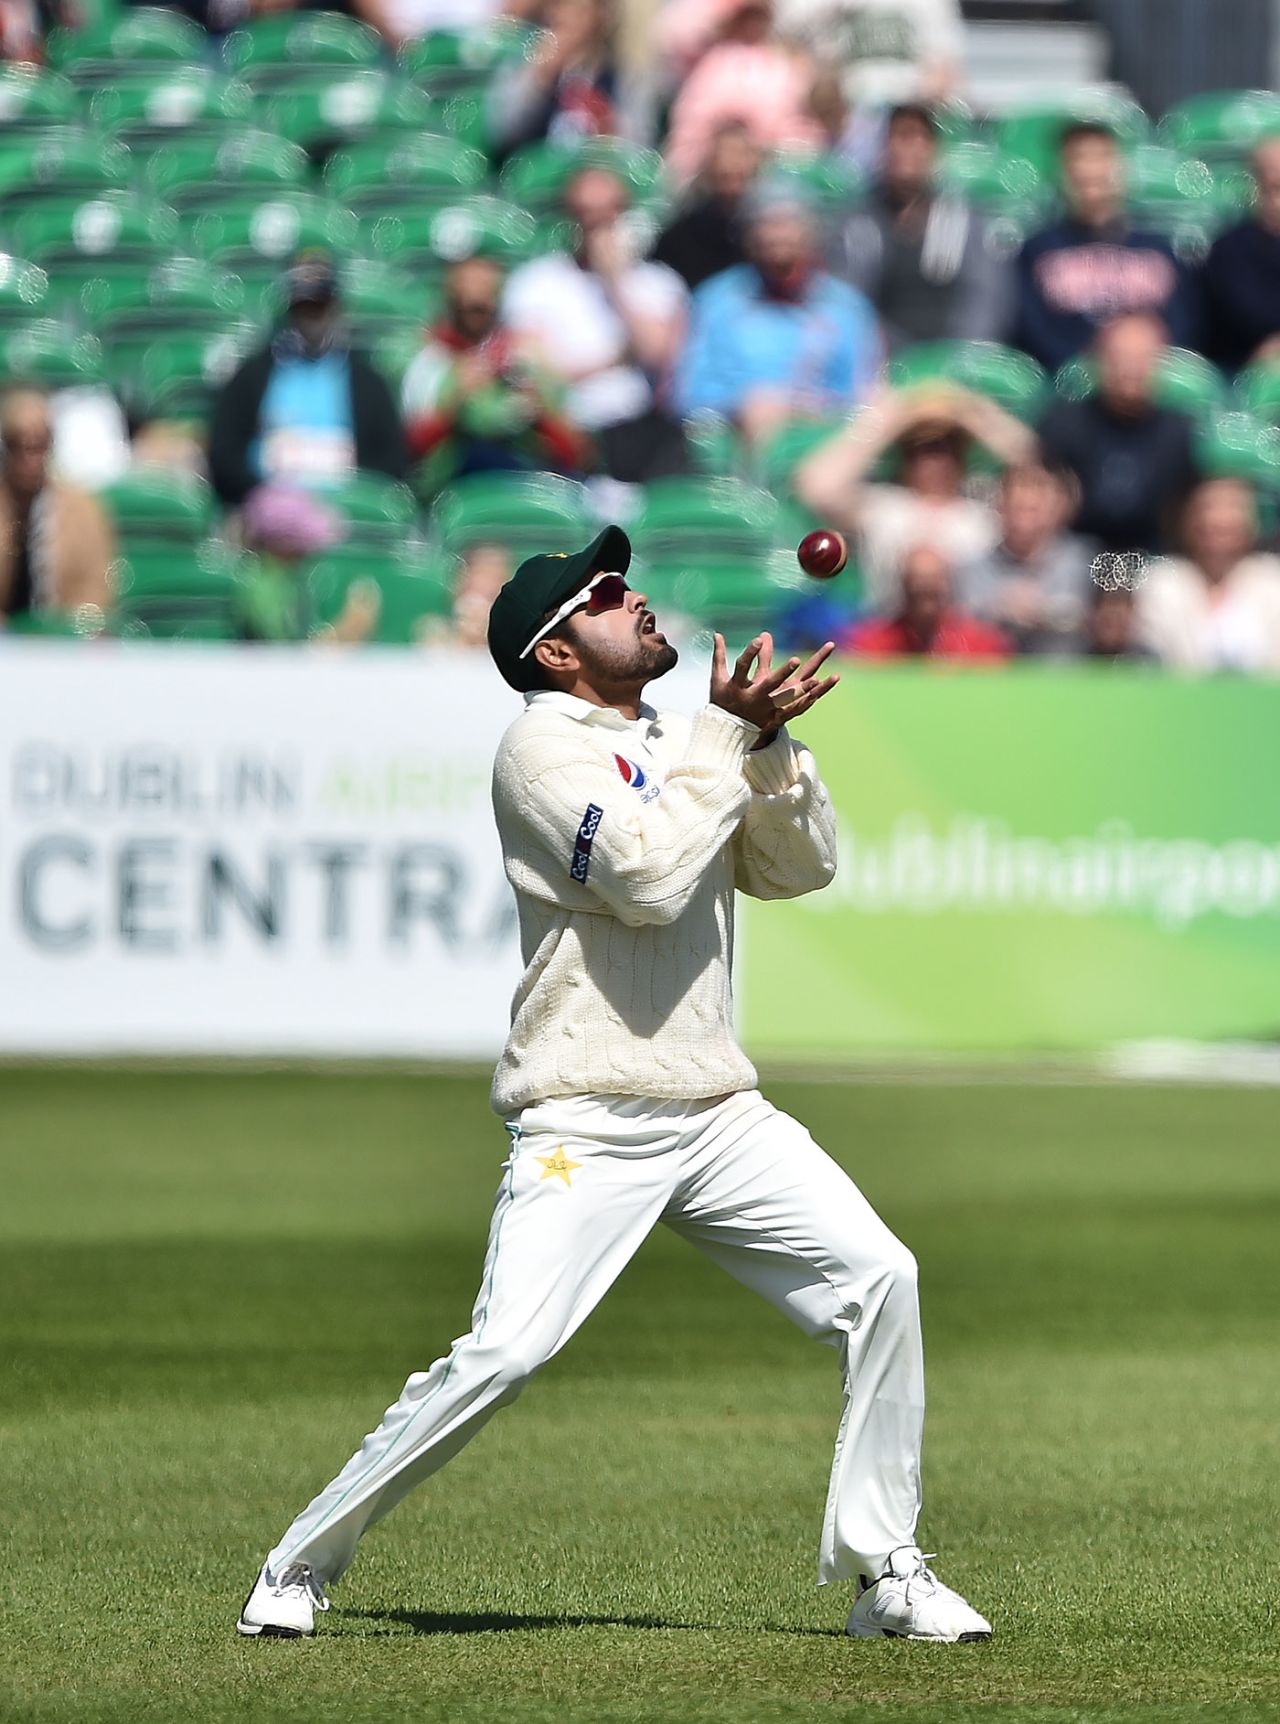 Babar Azam settles under the catch to remove Paul Stirling, Ireland v Pakistan, Only Test, Malahide, 3rd day, May 13, 2018